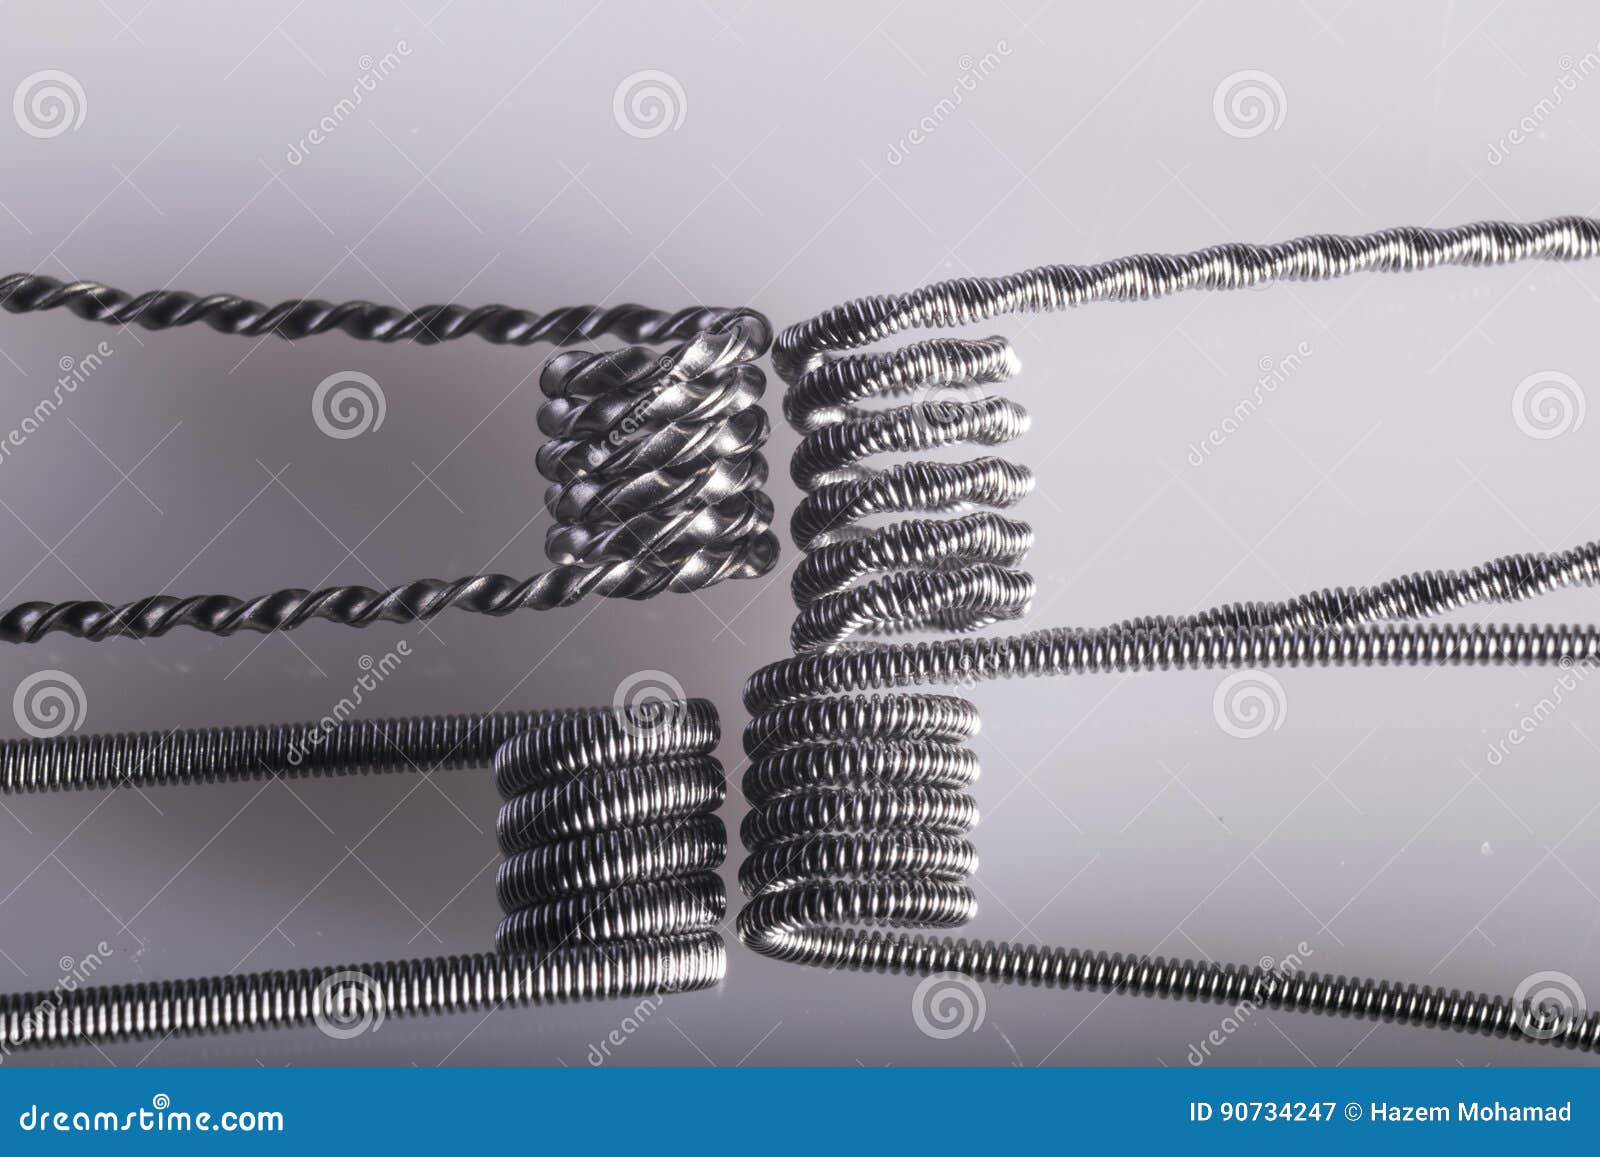 twisted multi strand vaping coils example.